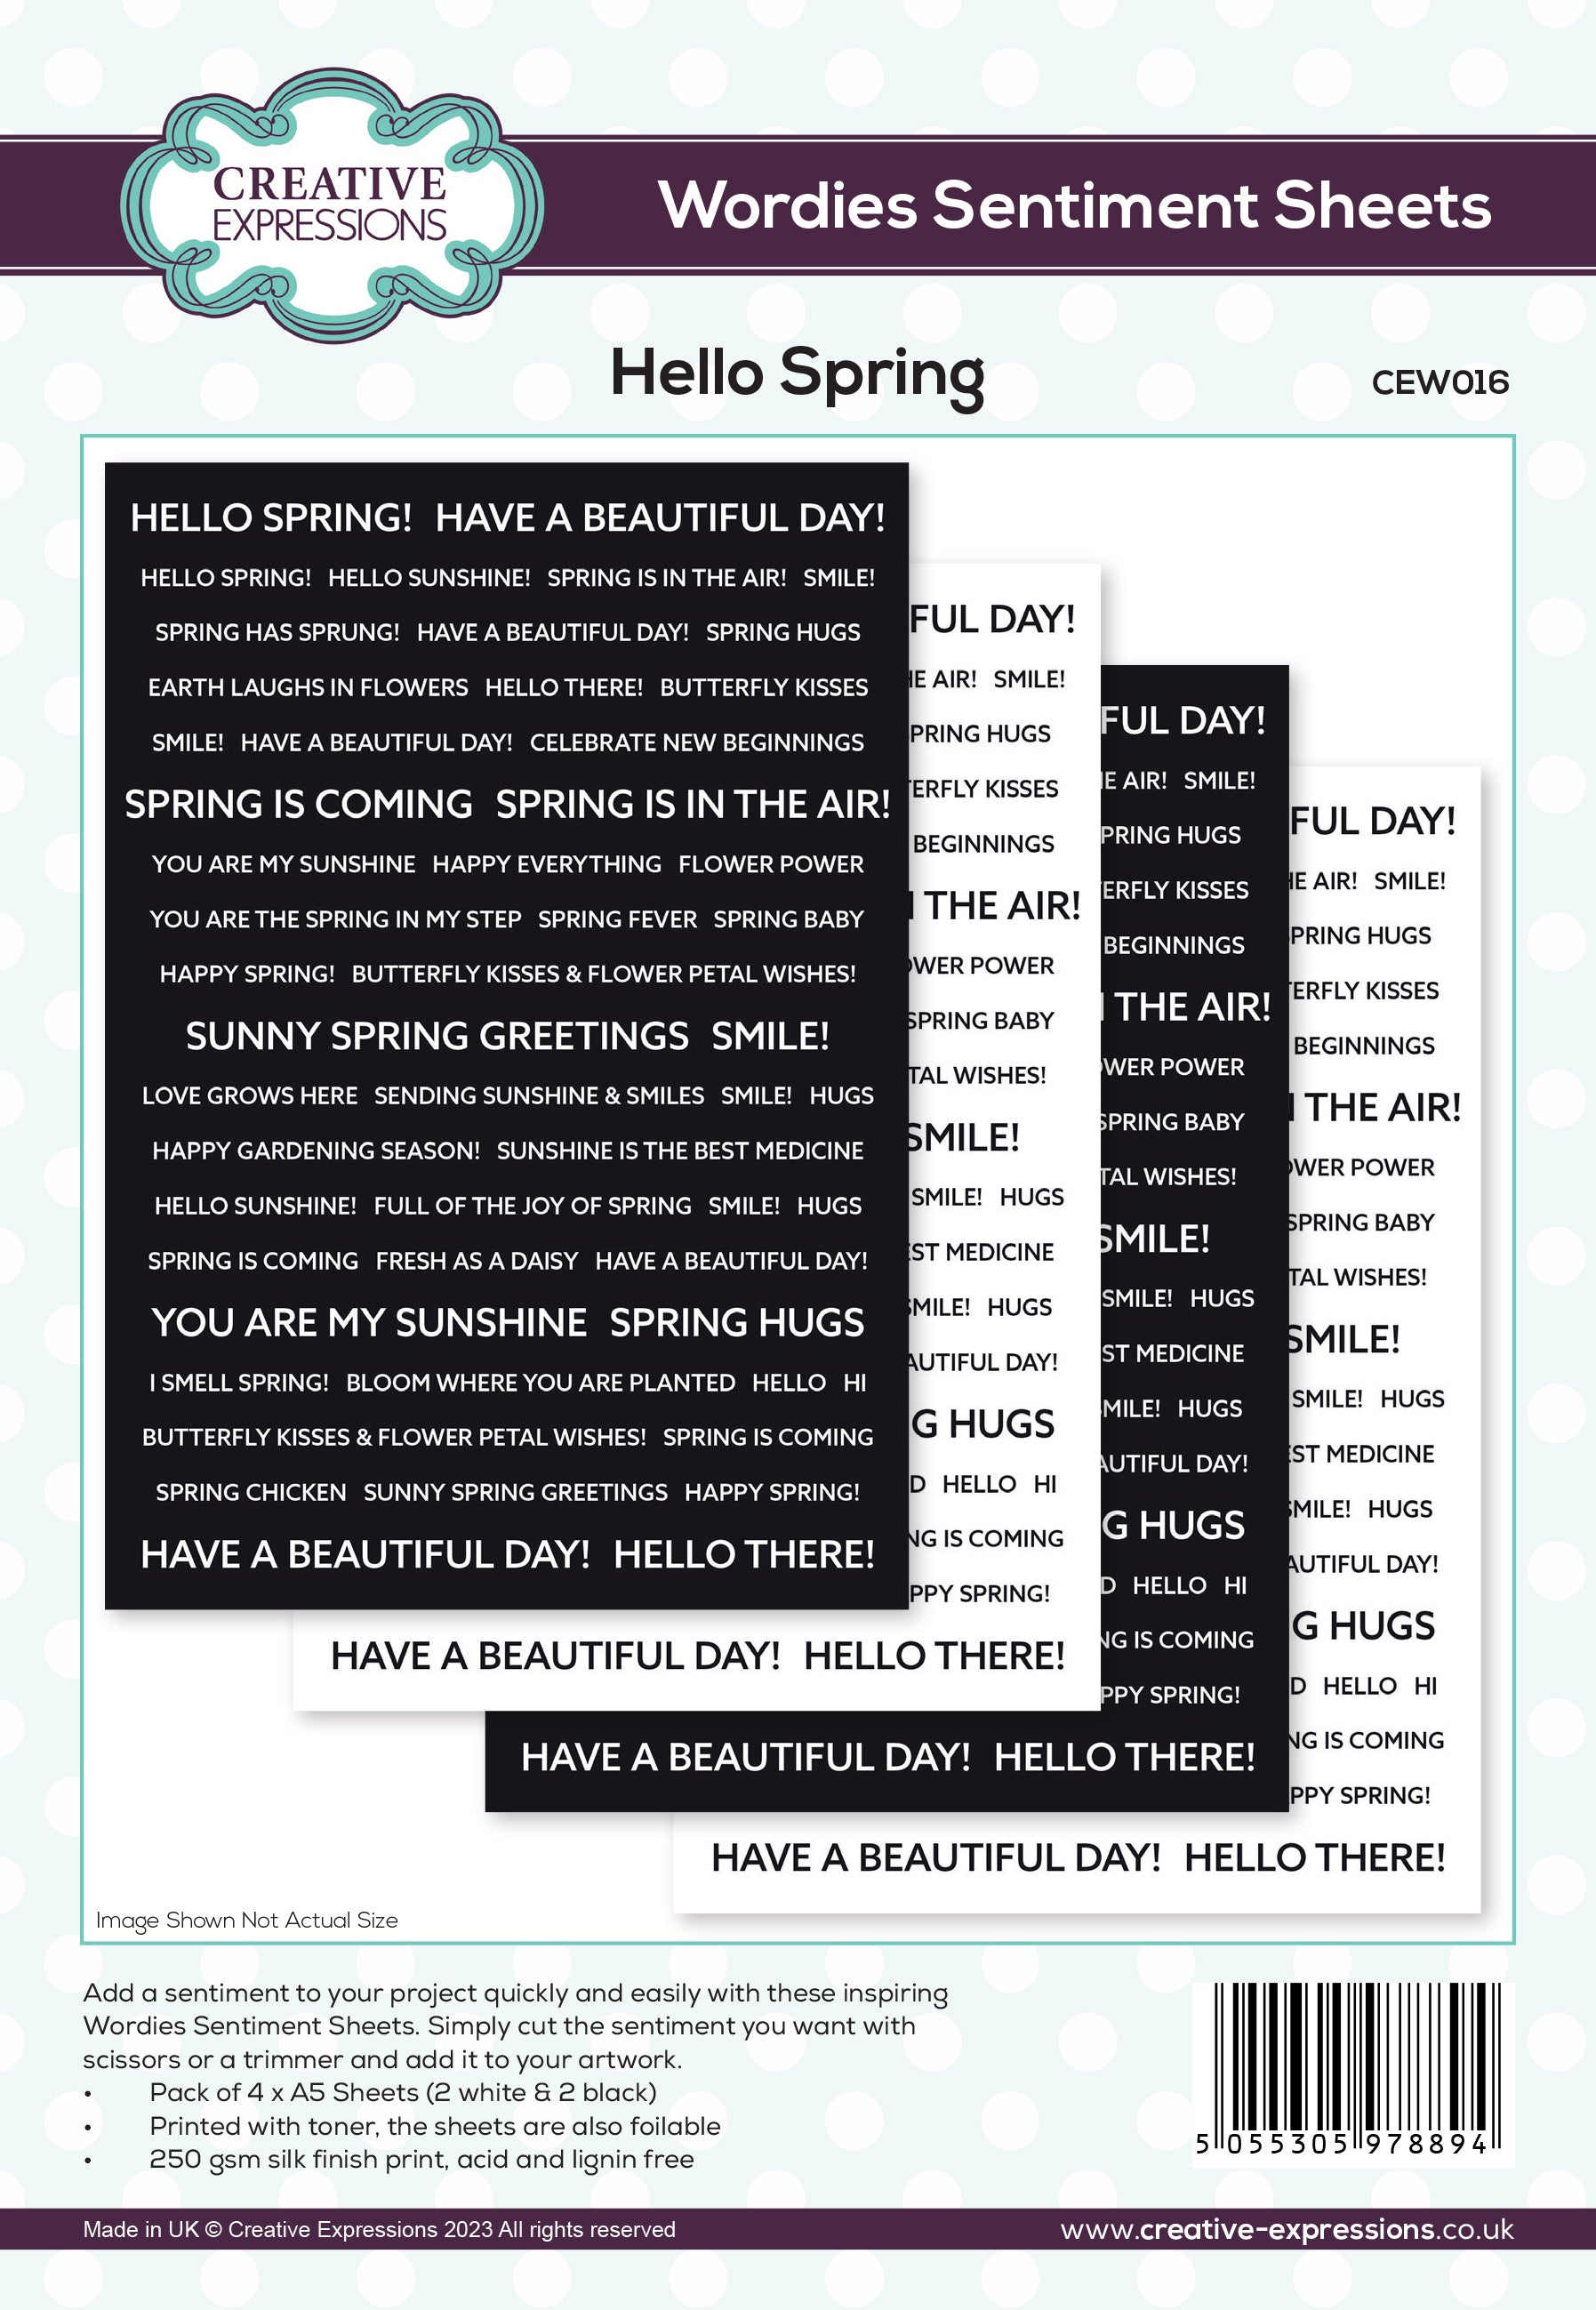 Creative Expressions Wordies Hello Spring Sentiment Sheets